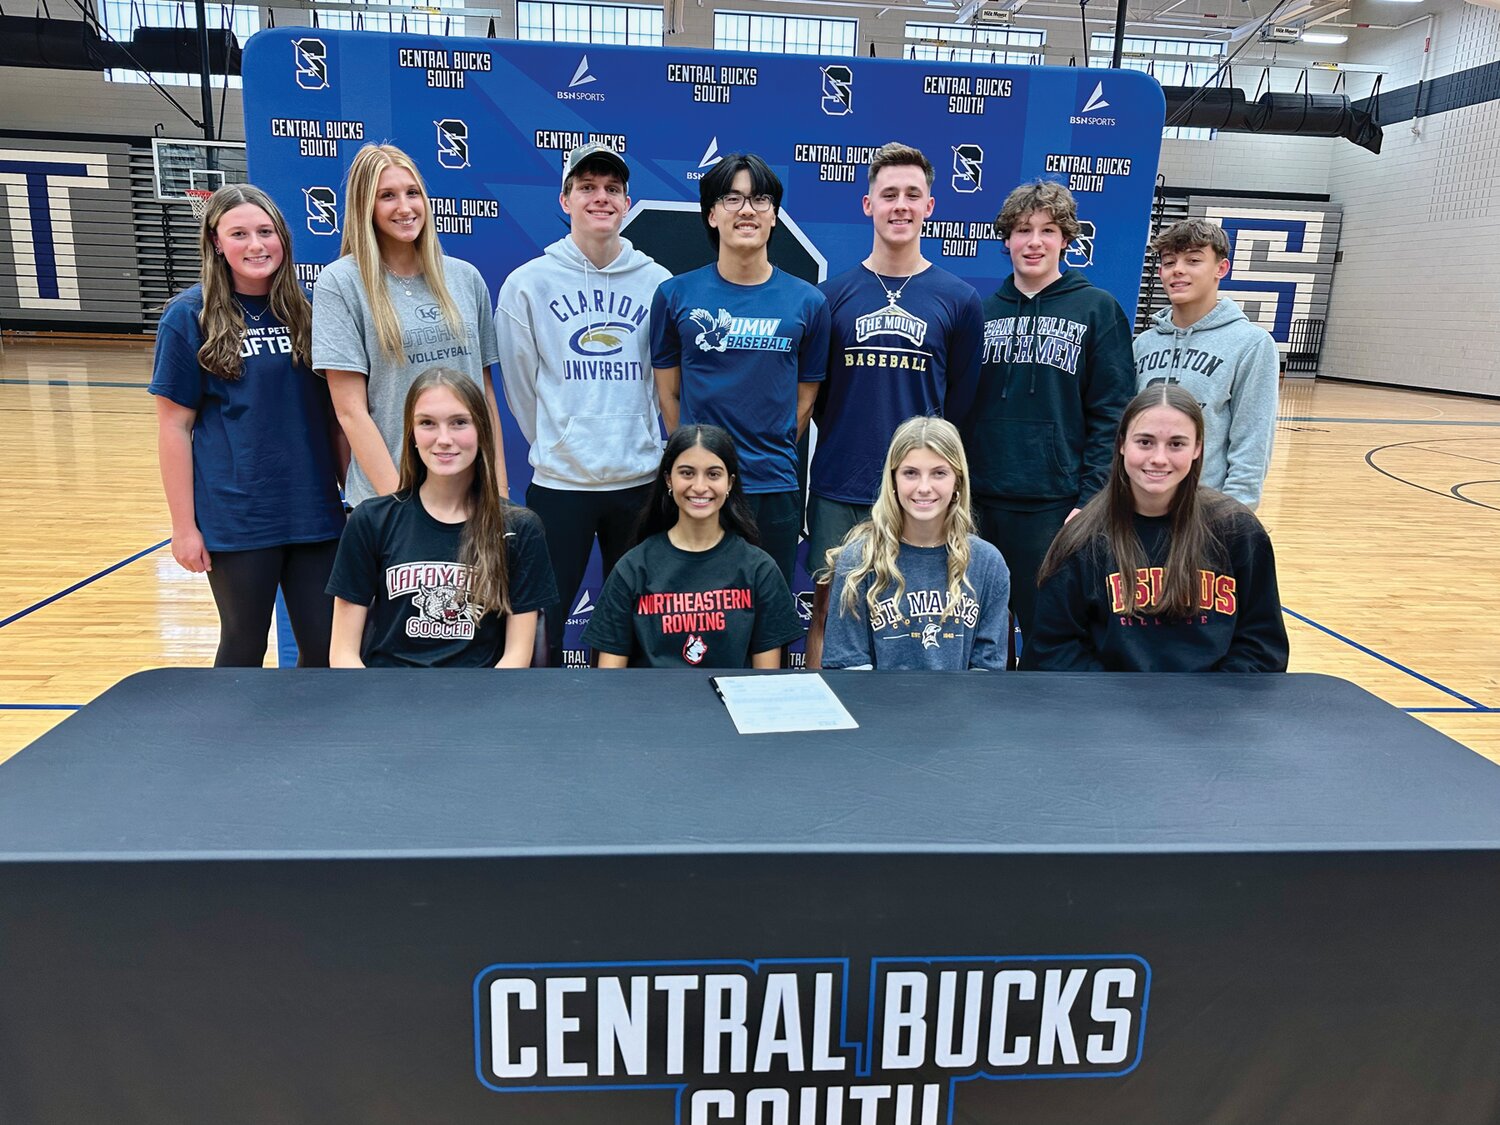 Central Bucks South recently recognized 11 seniors for their commitment to compete in collegiate sports. From left are: front row, Brooke Commins, Saara Sheth, Brooke Hall, Bella Smouse; back row, Steph Bendzlowicz, Jillian Jefferys, Richard Scholer, Michael Liu, Braeden Black, Dominic Varacallo and Keith Conner.